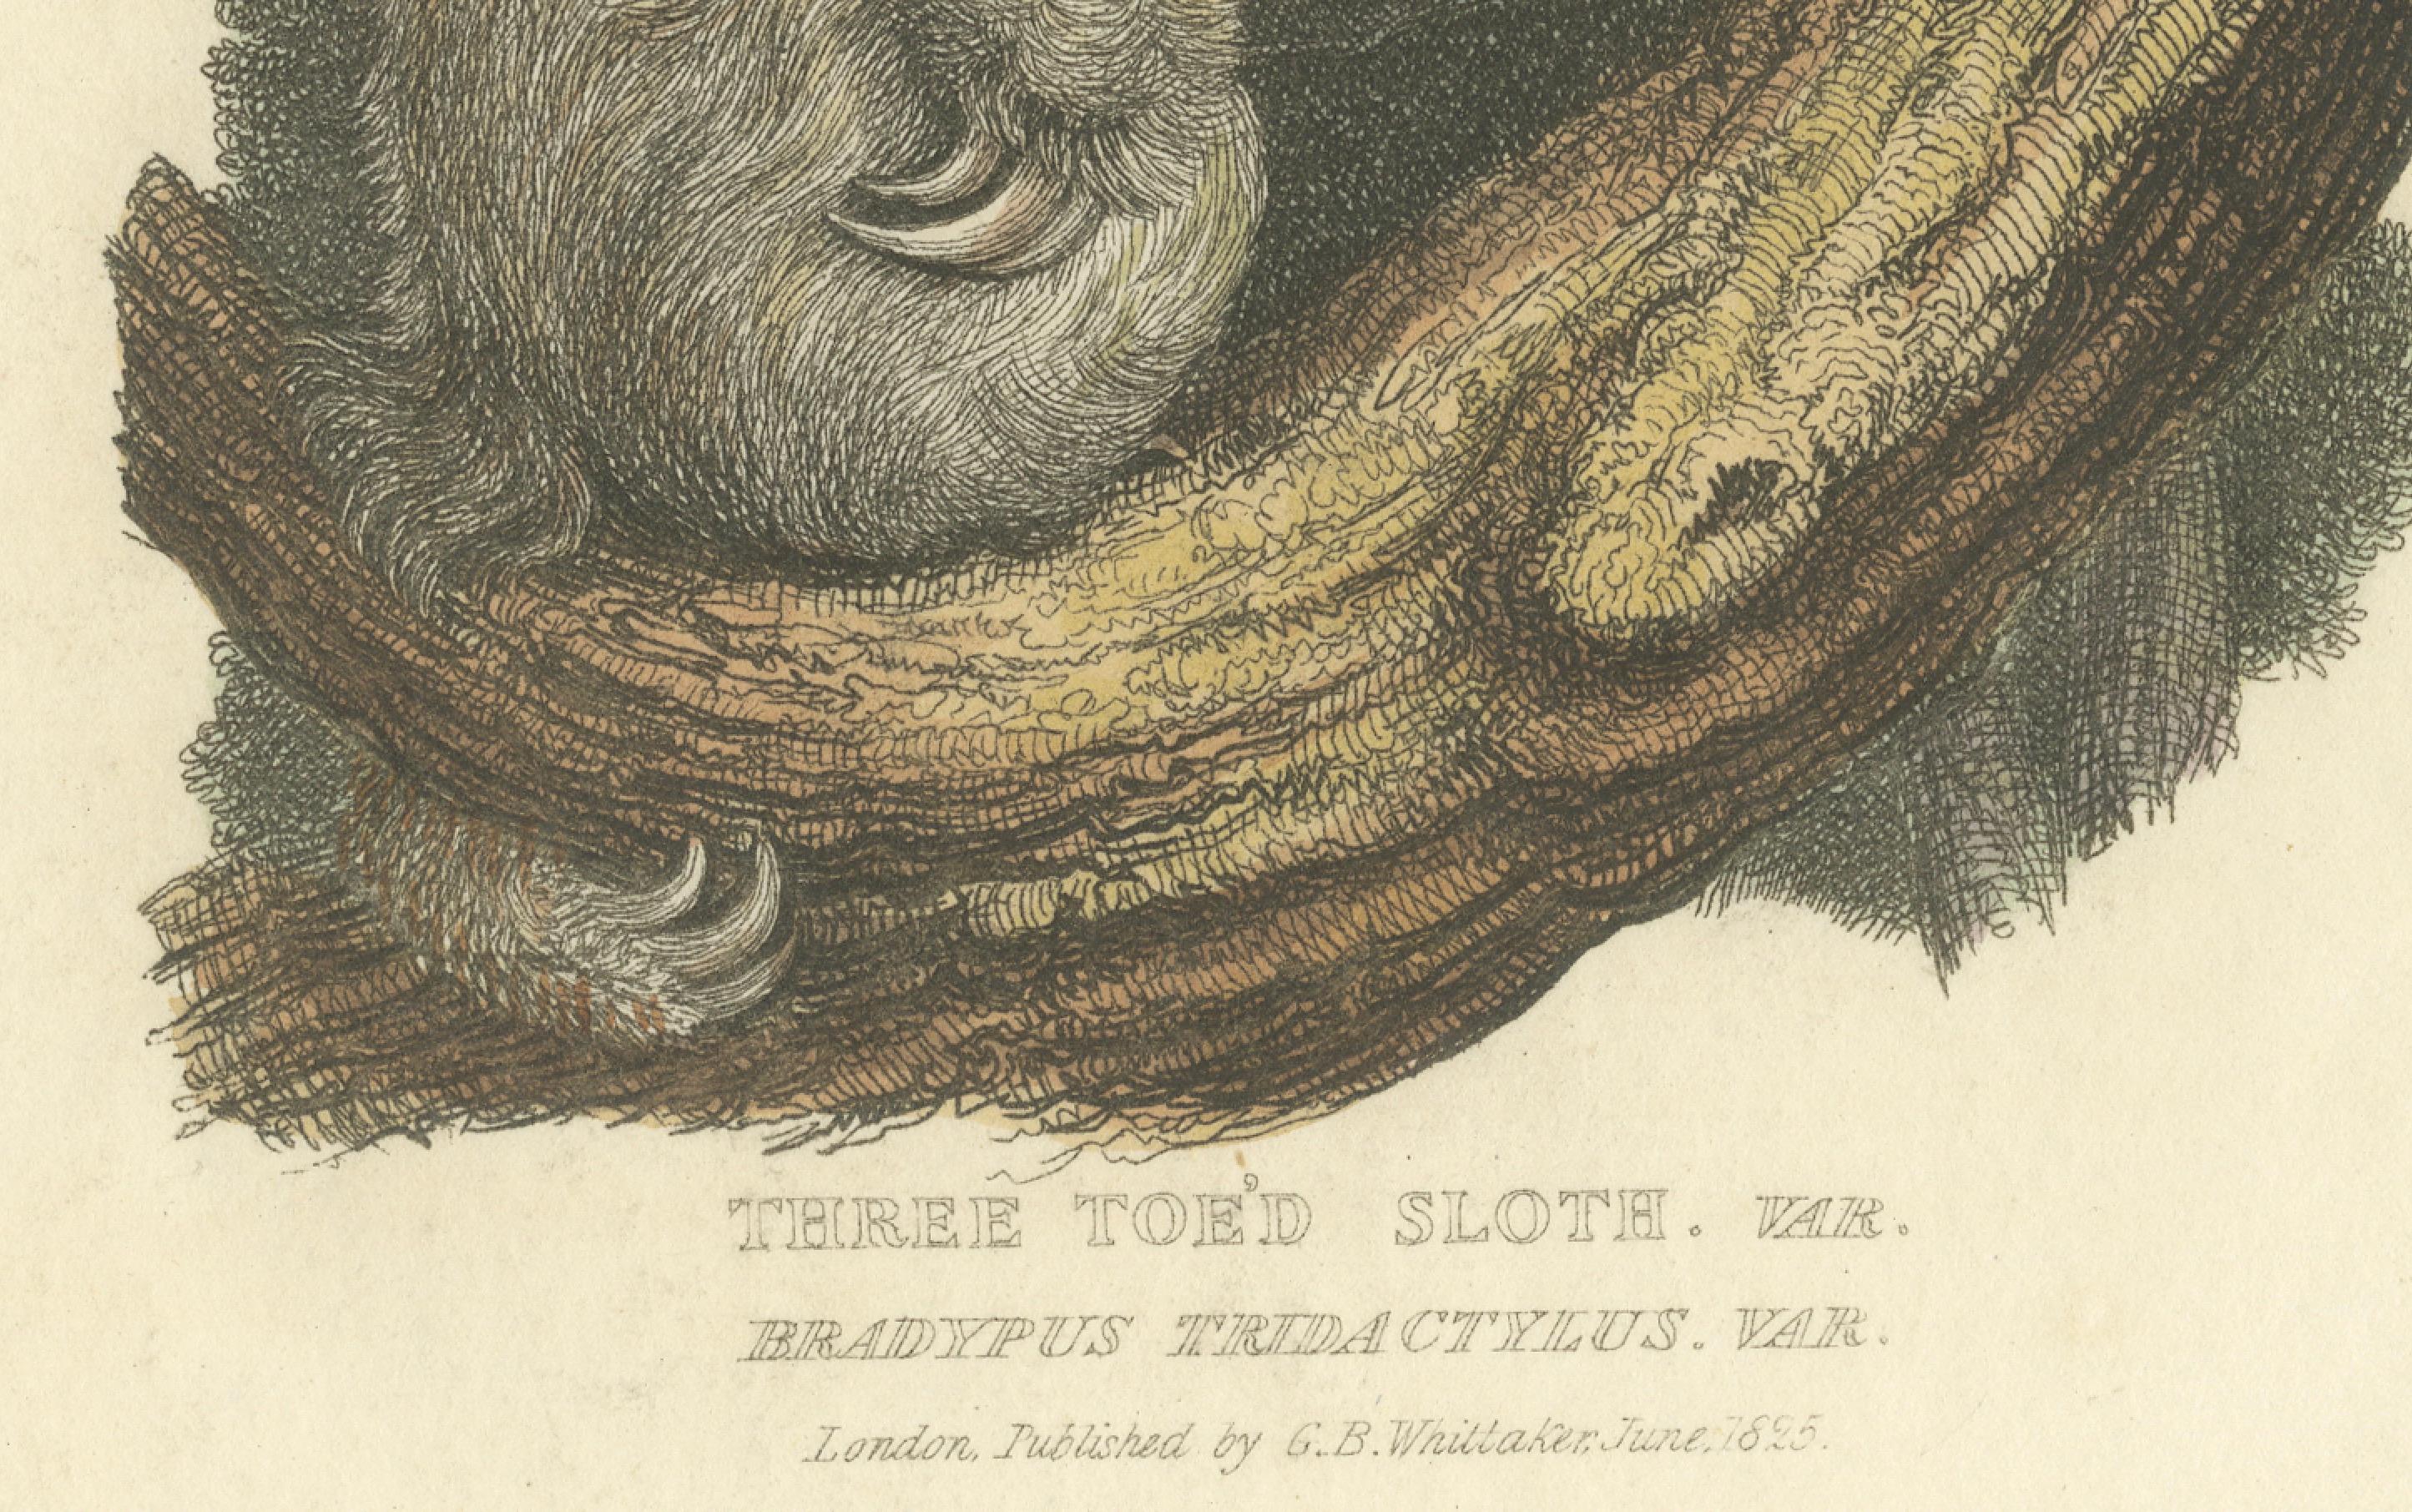 19th Century Antique Print with Hand Coloring of a Pale-Throated Sloth For Sale